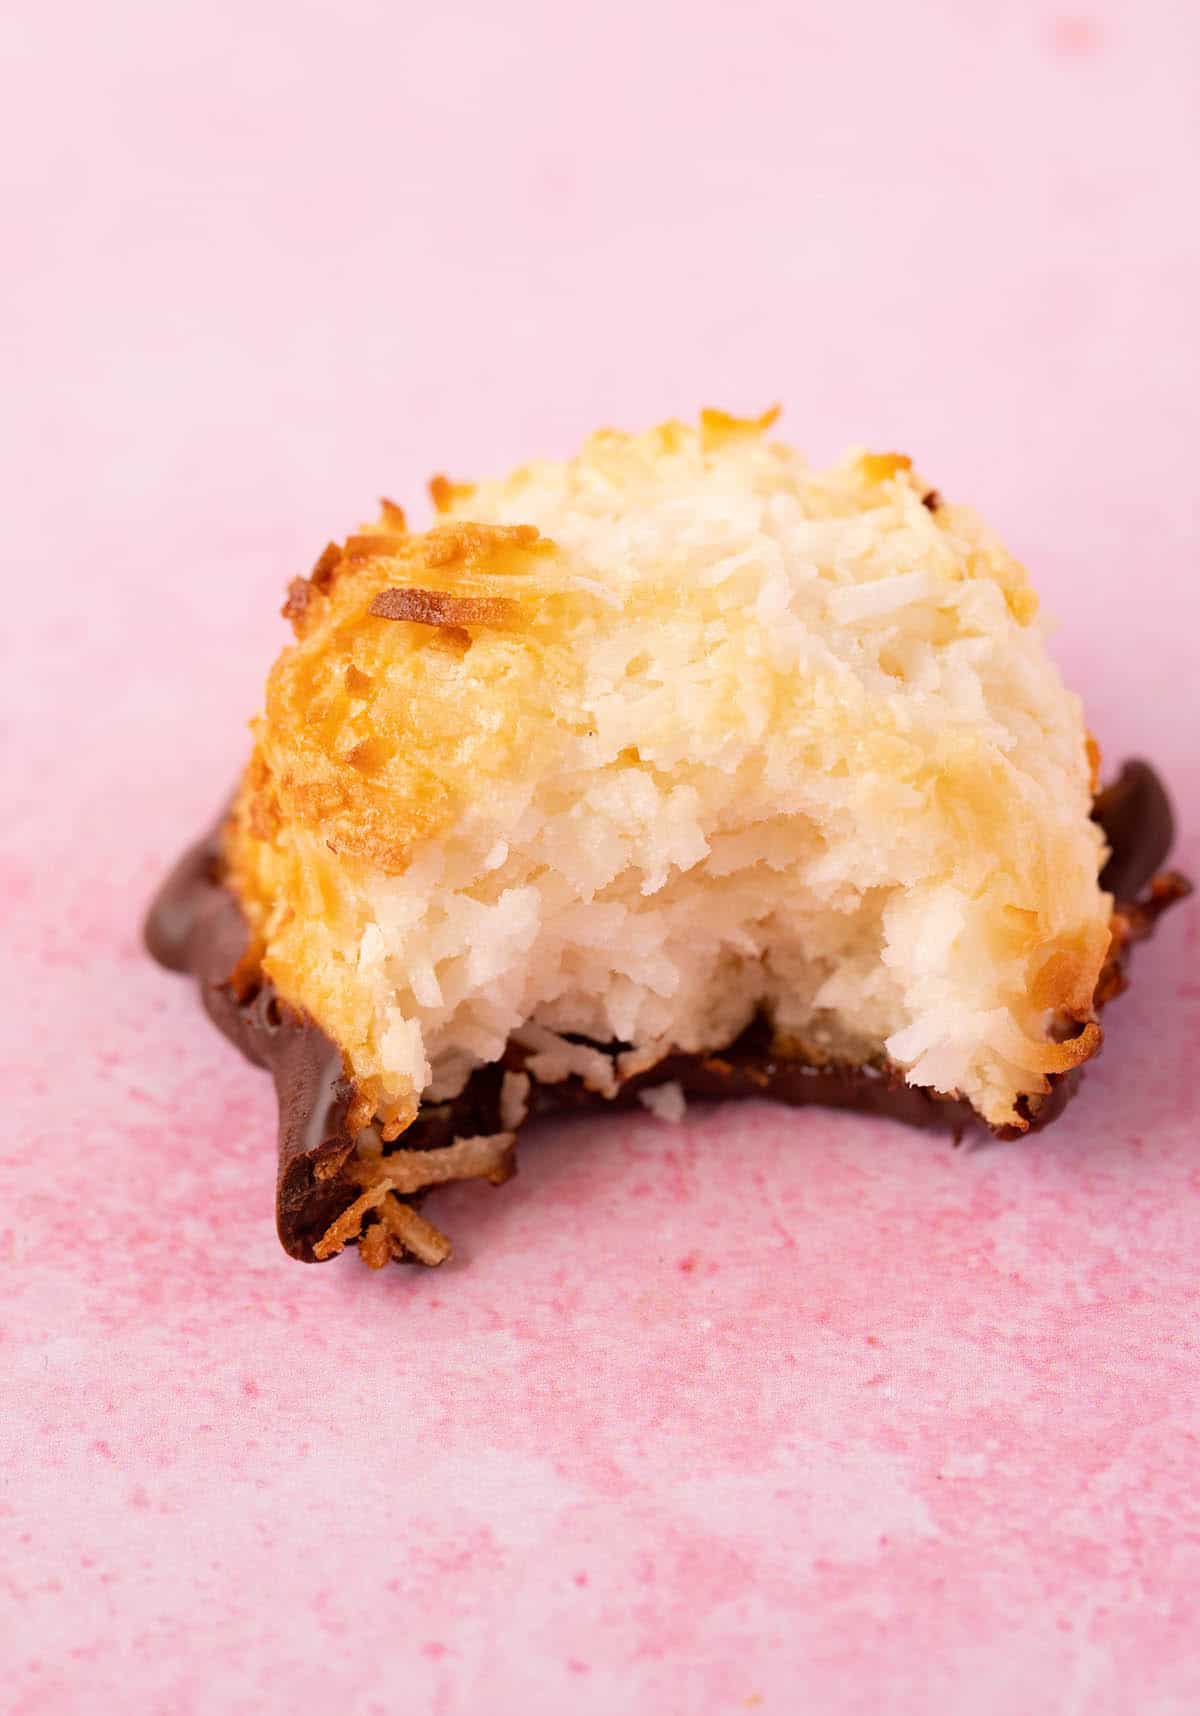 A homemade Coconut Macaroon with a bite taken out of it.